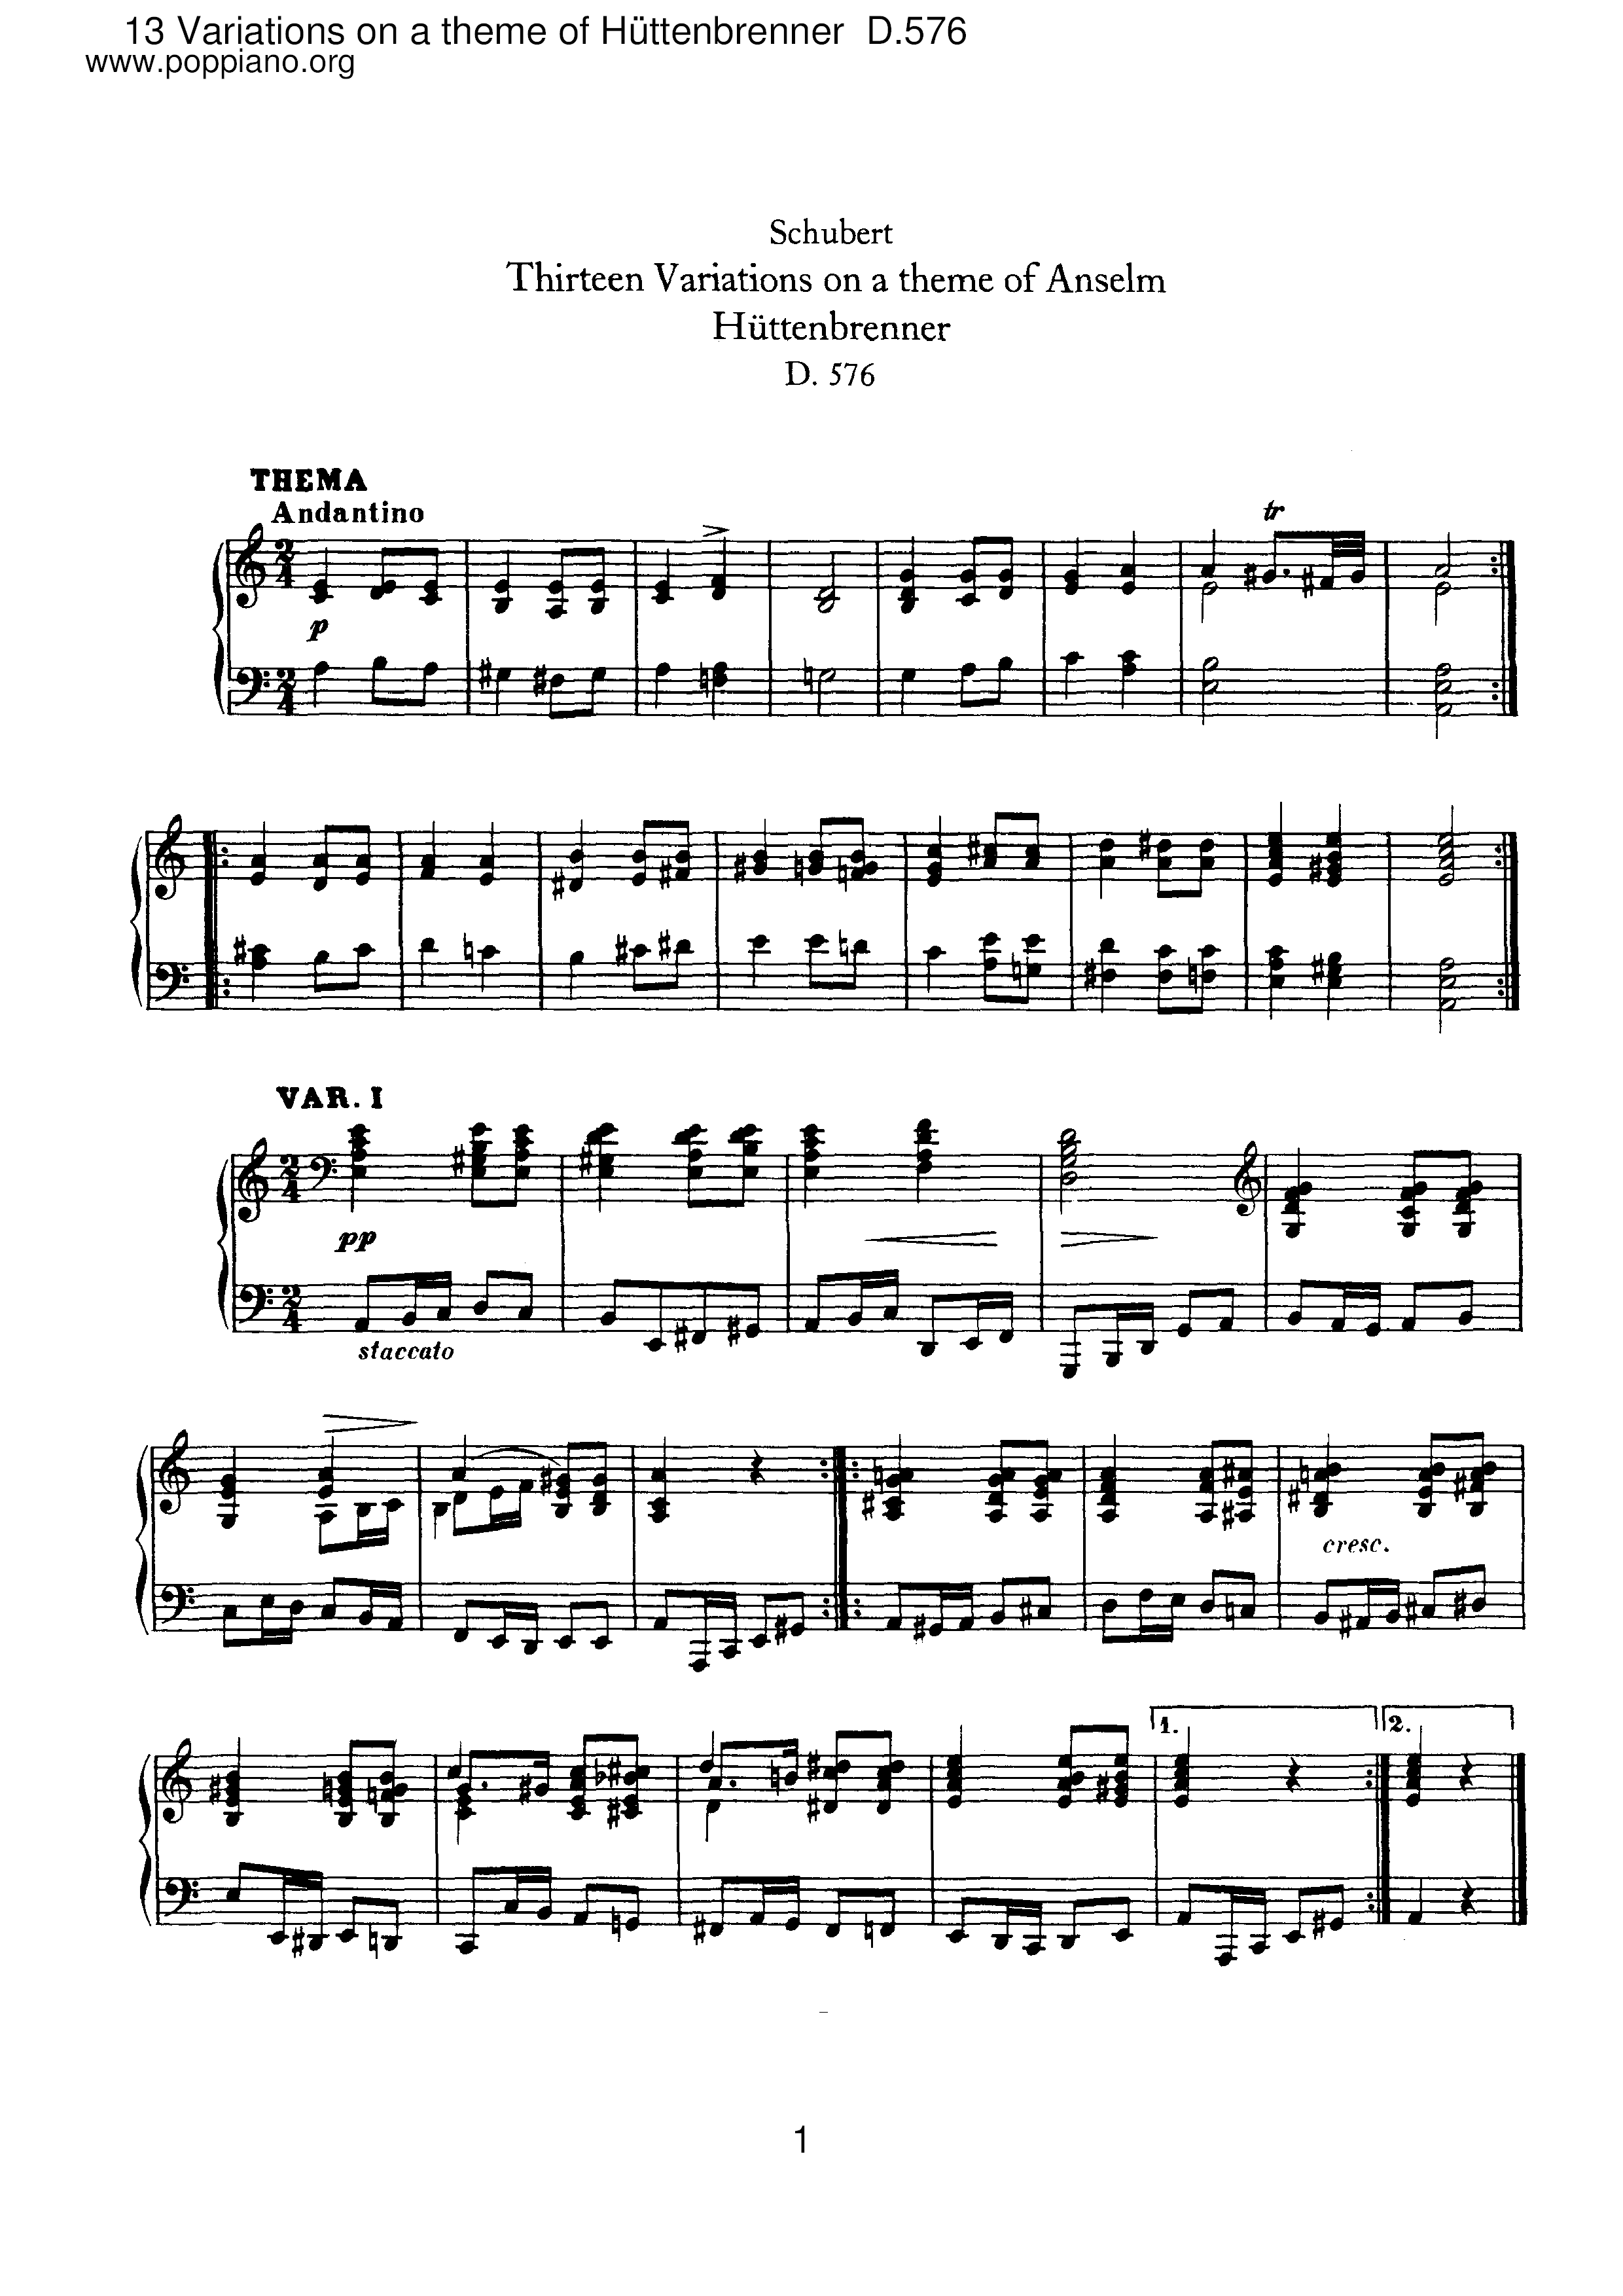 13 Variations on a Theme of Huttenbrennet, D.576 Score